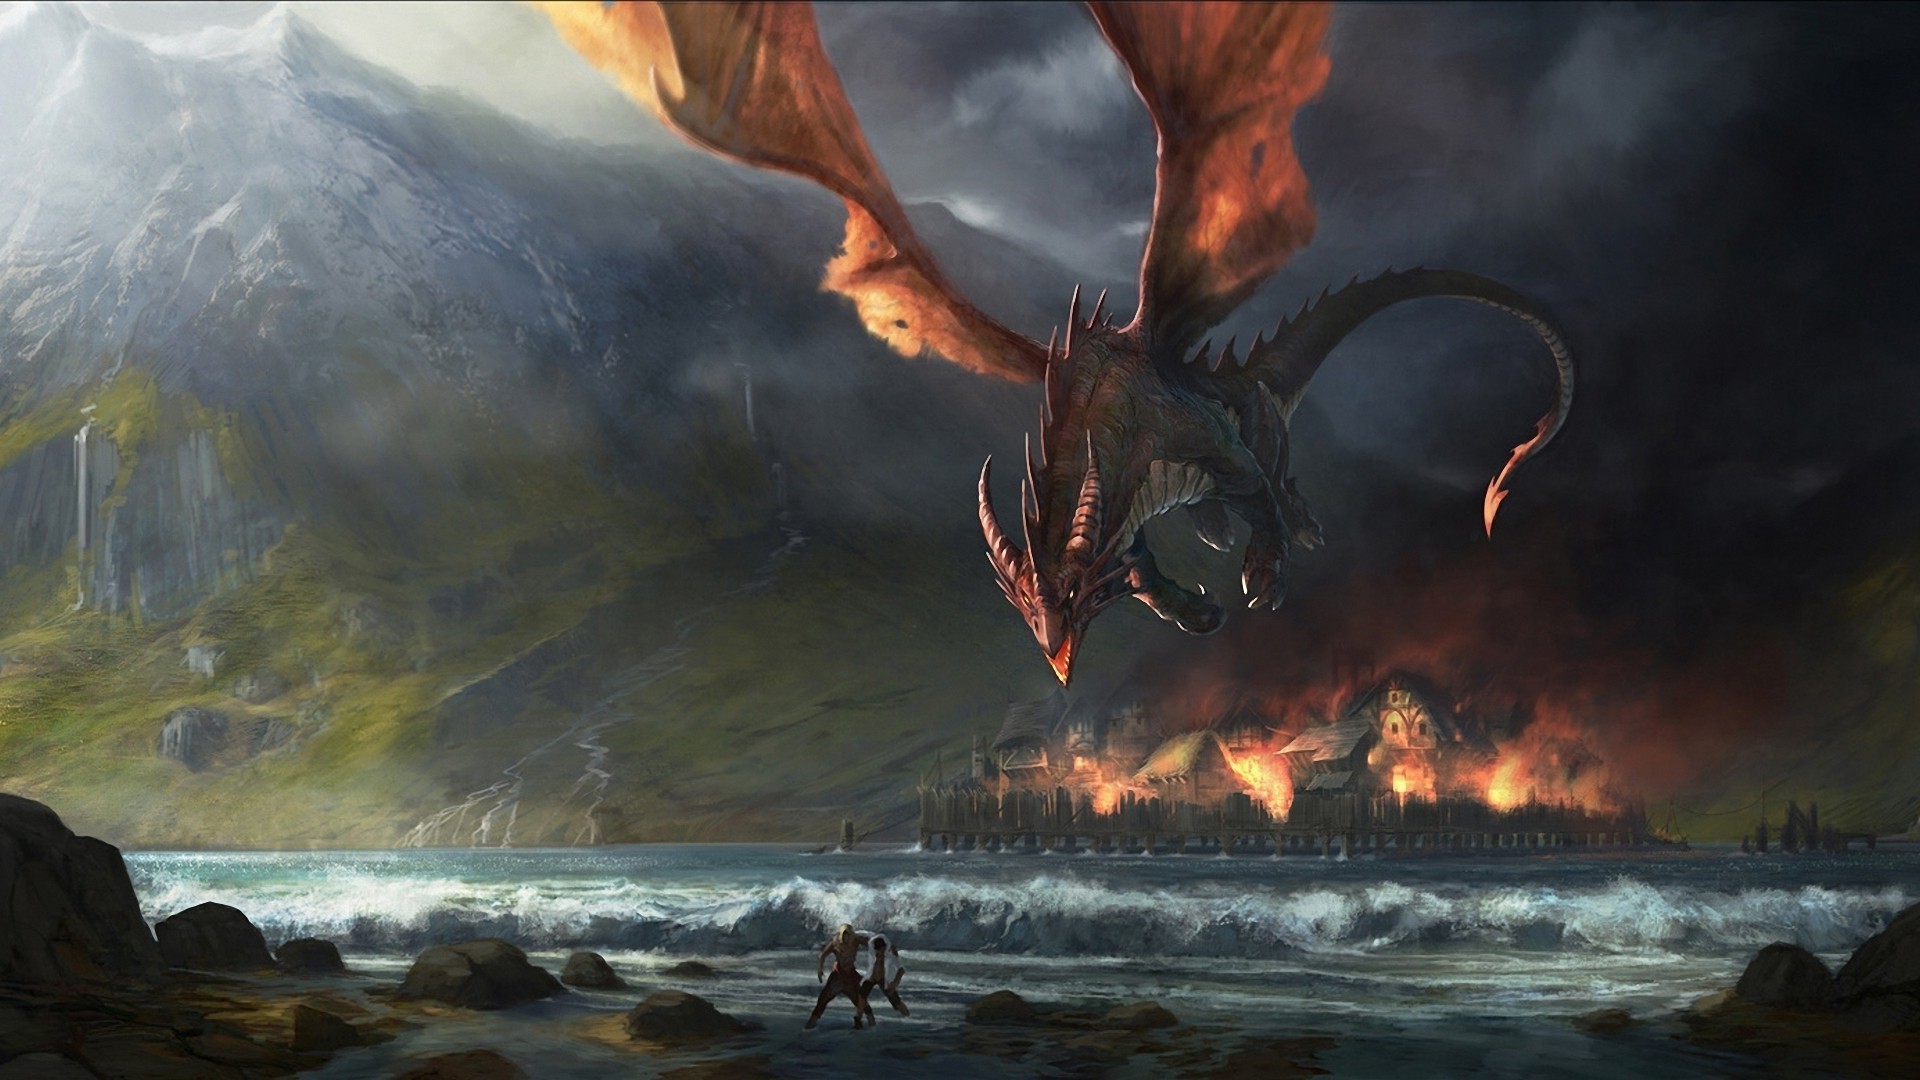 1920x1080 J. R. R. Tolkien, Fantasy Art, Dragon, The Hobbit, Smaug, The Lord Of